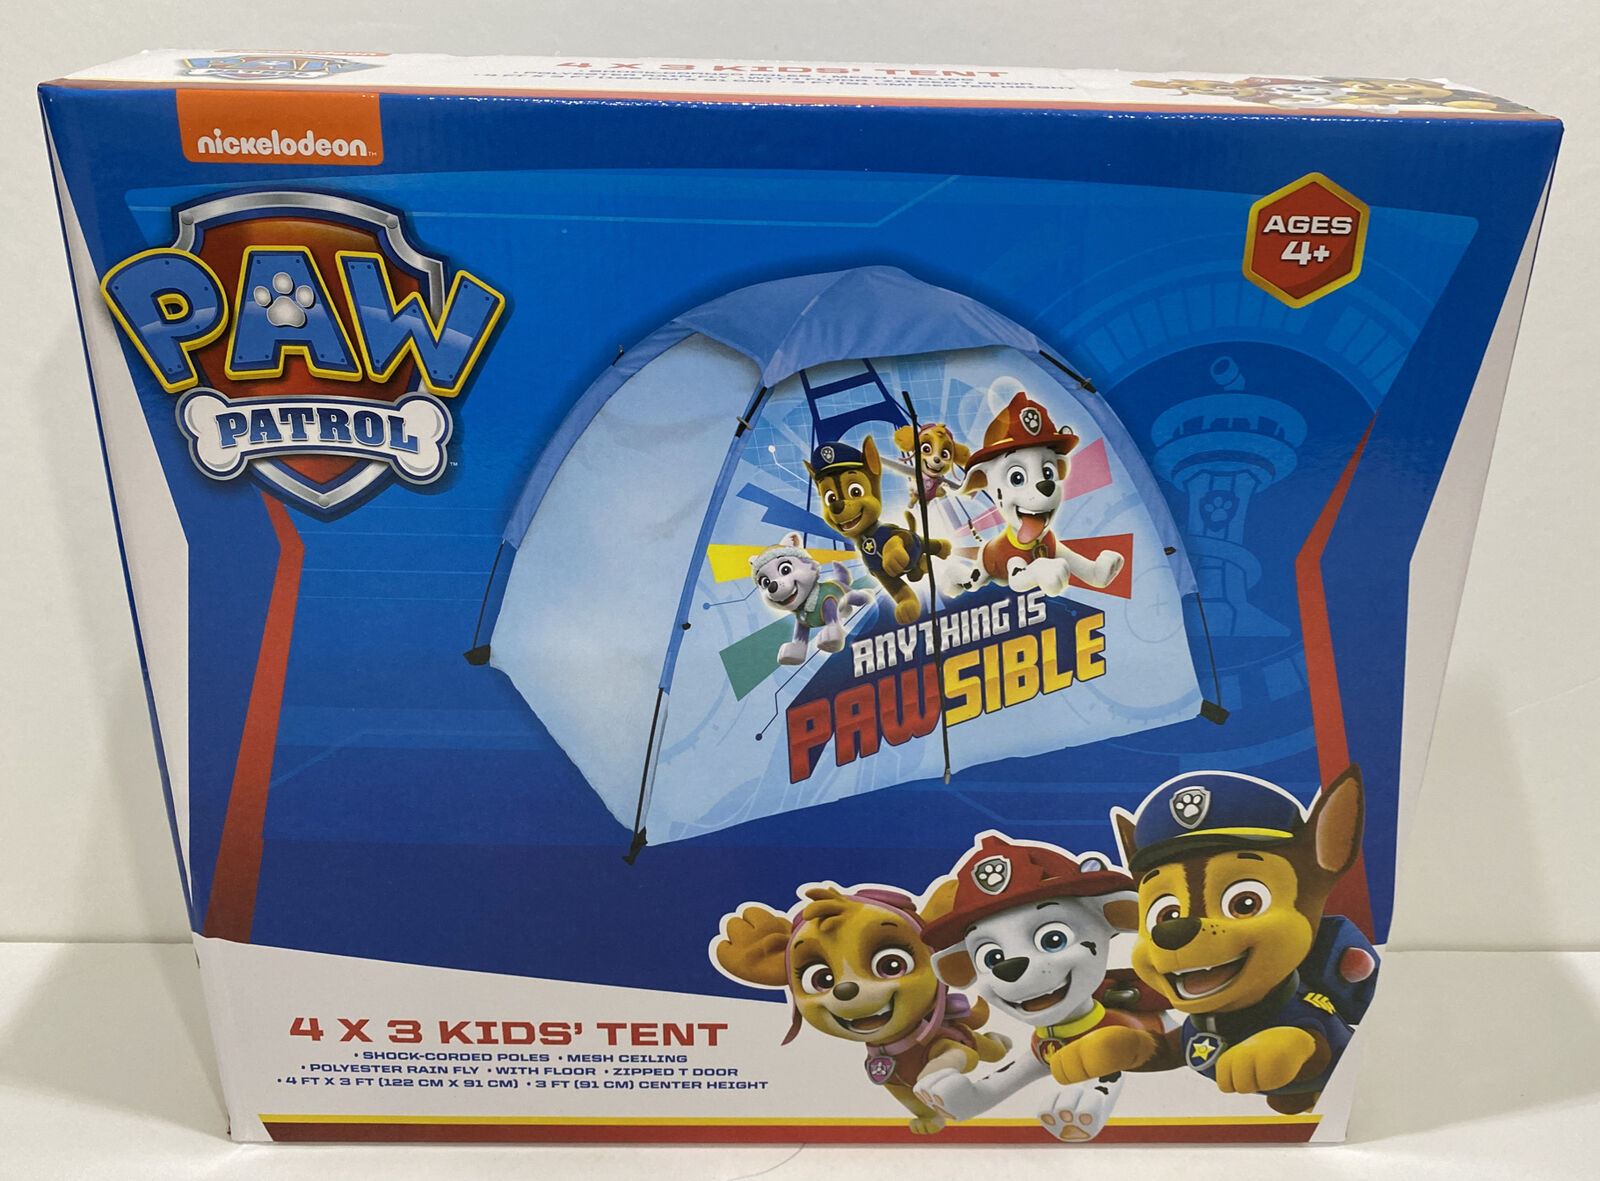 Paw Patrol 4' x 3' Kids Tent Blue Camping Play Dome 